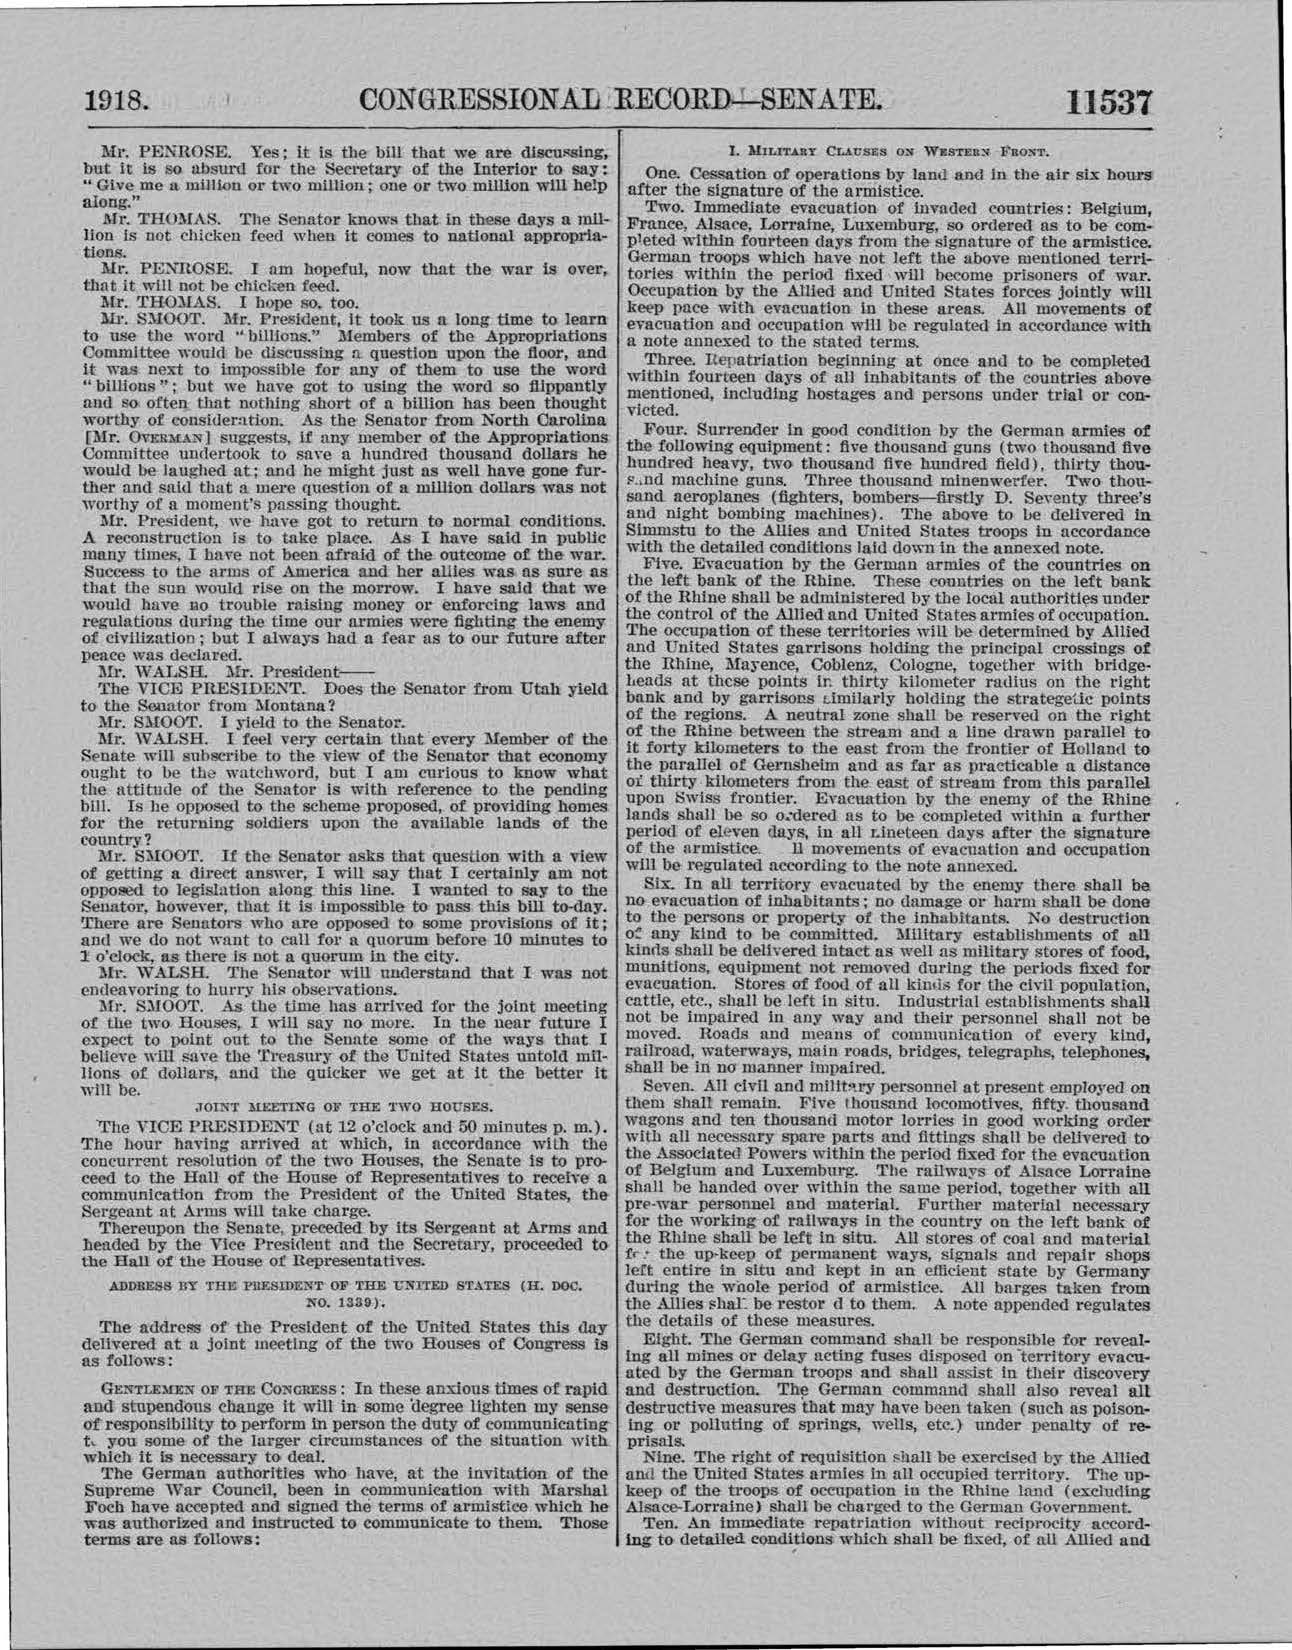 First page of the text of President Wilson's address to Congress as printed in the Bound Congressional Record